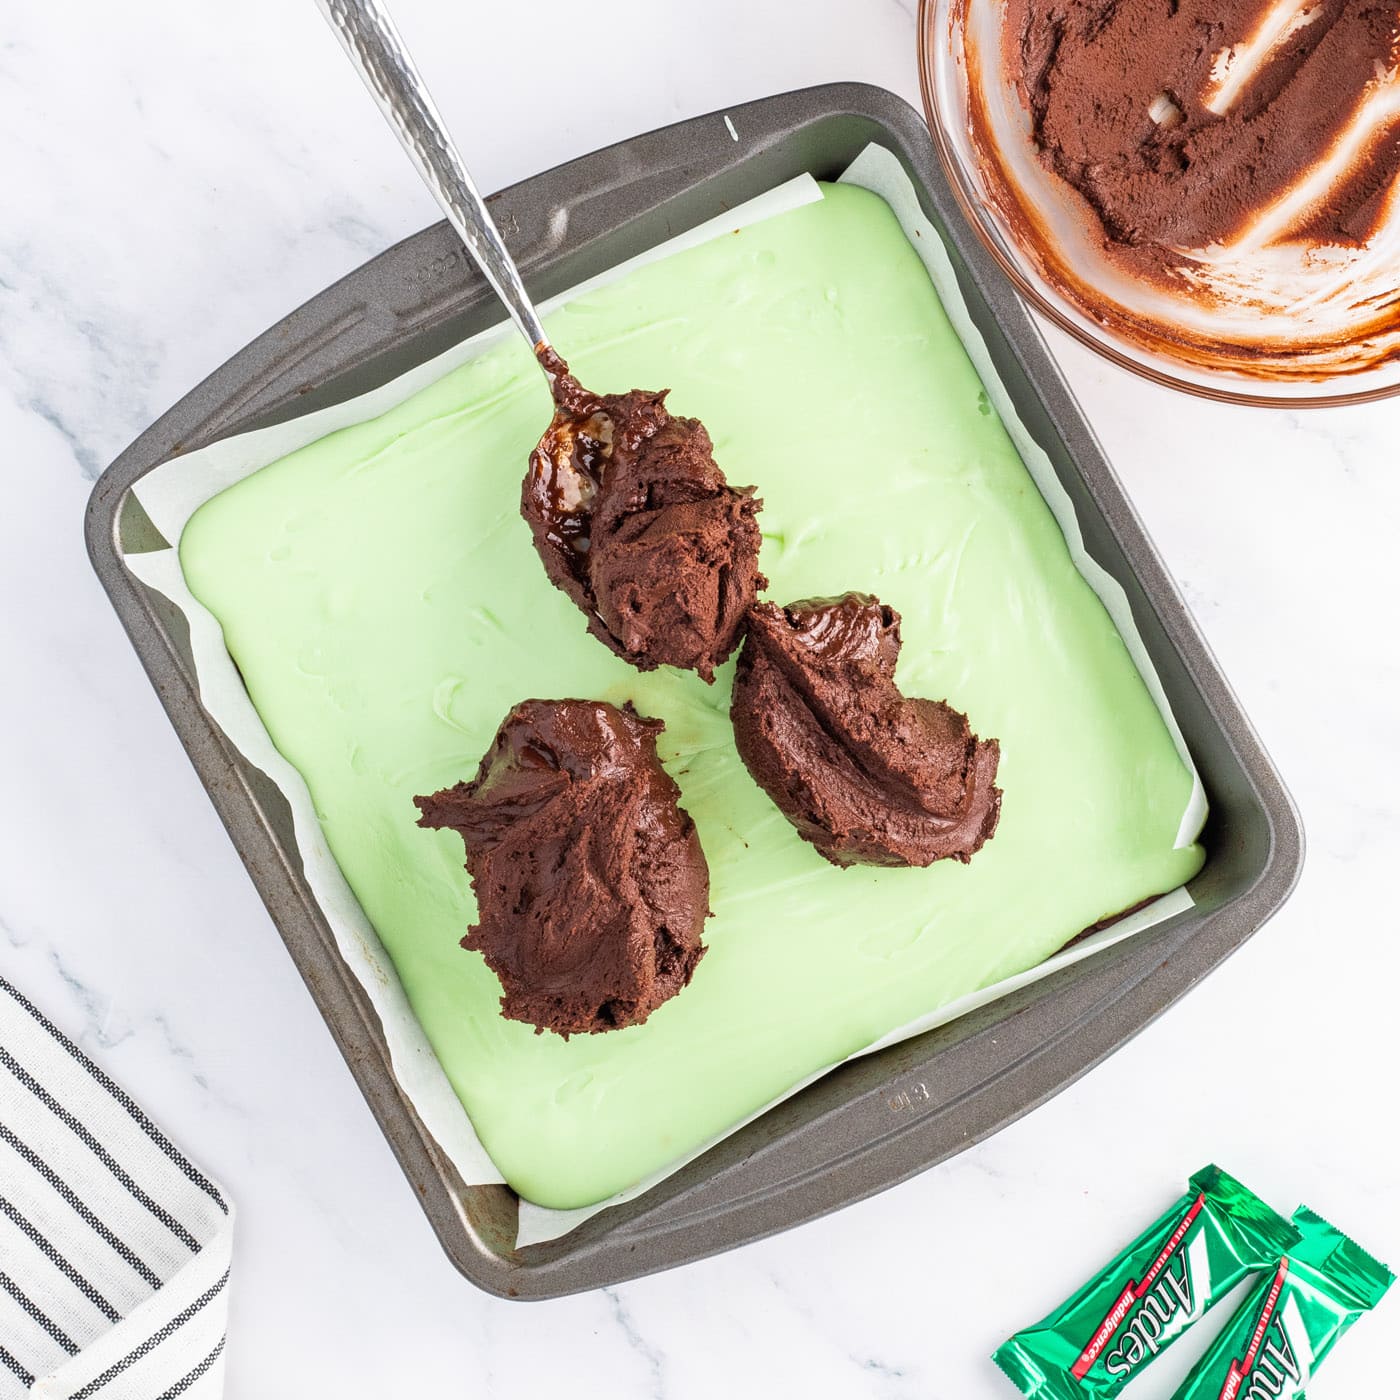 spreading chocolate layer over mint fudge